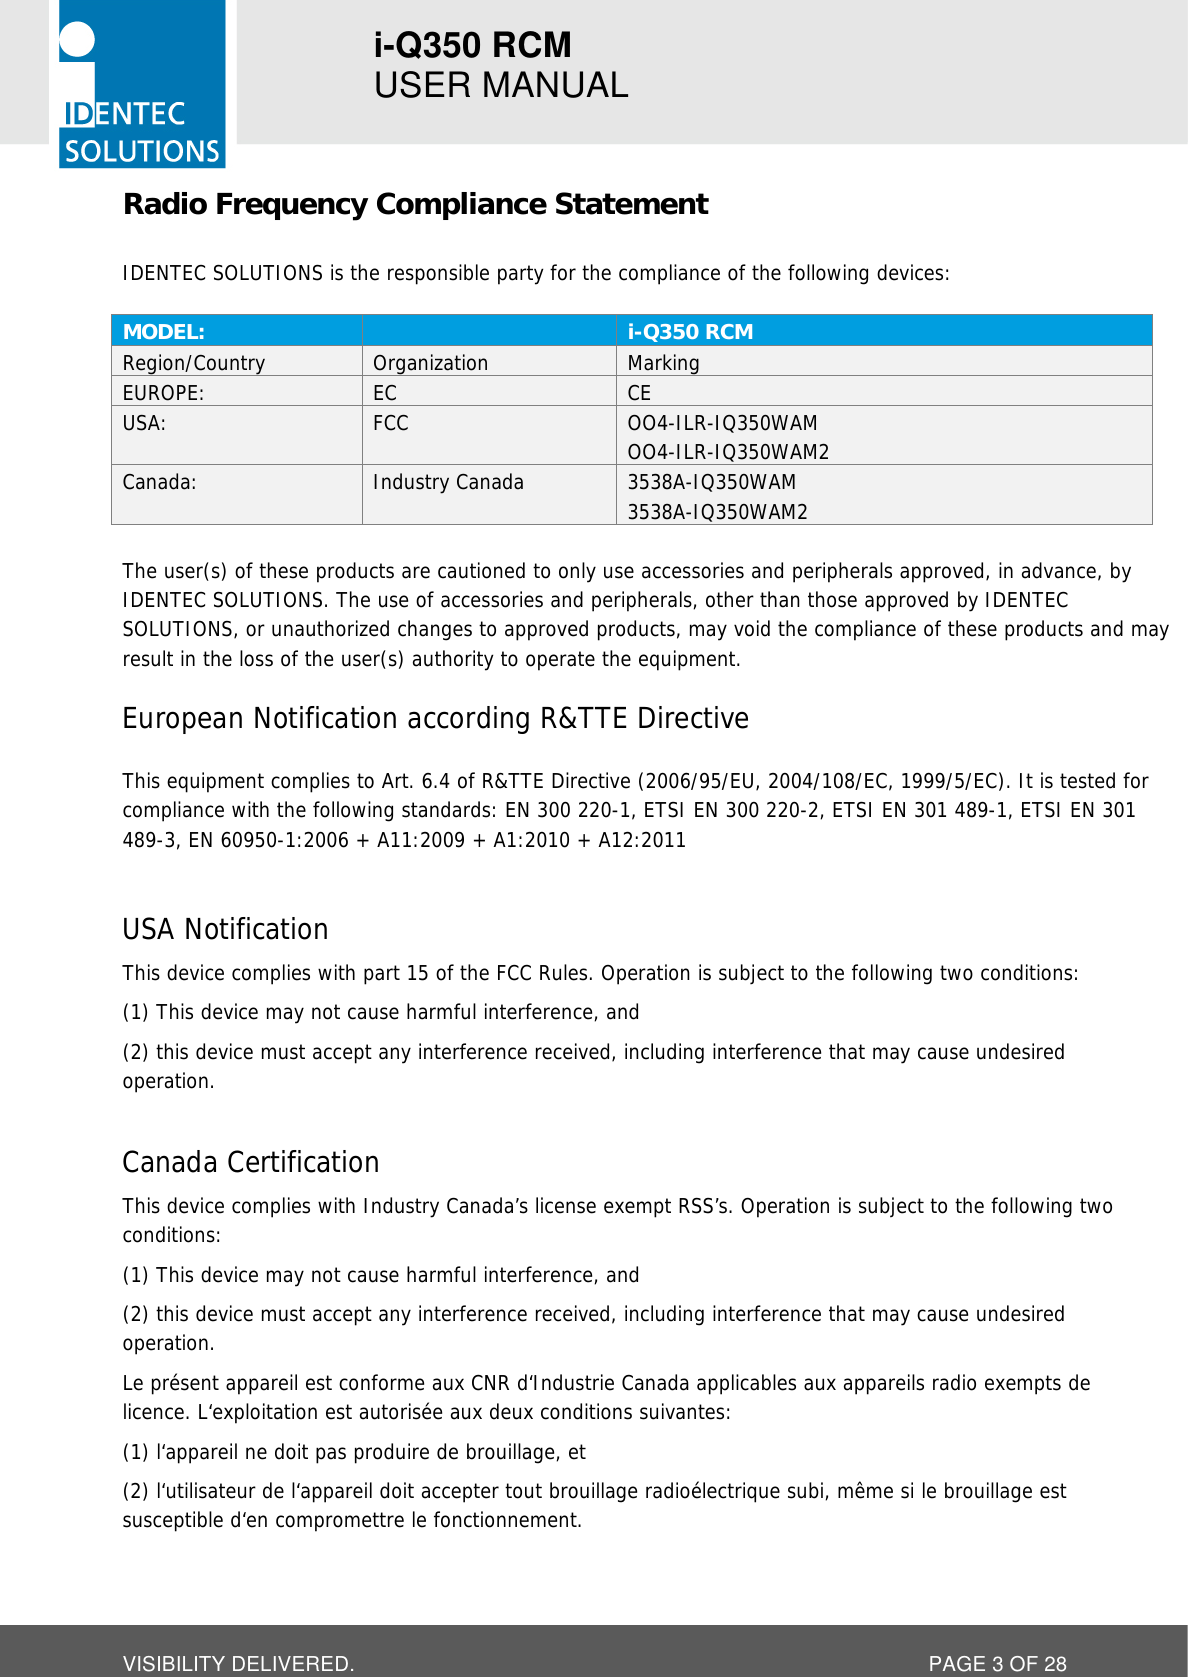 i-Q350 RCM   USER MANUAL  VISIBILITY DELIVERED.  PAGE 3 OF 28 Radio Frequency Compliance Statement  IDENTEC SOLUTIONS is the responsible party for the compliance of the following devices:  MODEL:  i-Q350 RCM Region/Country Organization Marking EUROPE: EC CE USA: FCC OO4-ILR-IQ350WAM OO4-ILR-IQ350WAM2 Canada: Industry Canada 3538A-IQ350WAM 3538A-IQ350WAM2  The user(s) of these products are cautioned to only use accessories and peripherals approved, in advance, by IDENTEC SOLUTIONS. The use of accessories and peripherals, other than those approved by IDENTEC SOLUTIONS, or unauthorized changes to approved products, may void the compliance of these products and may result in the loss of the user(s) authority to operate the equipment.  European Notification according R&amp;TTE Directive  This equipment complies to Art. 6.4 of R&amp;TTE Directive (2006/95/EU, 2004/108/EC, 1999/5/EC). It is tested for compliance with the following standards: EN 300 220-1, ETSI EN 300 220-2, ETSI EN 301 489-1, ETSI EN 301 489-3, EN 60950-1:2006 + A11:2009 + A1:2010 + A12:2011   USA Notification This device complies with part 15 of the FCC Rules. Operation is subject to the following two conditions:  (1) This device may not cause harmful interference, and  (2) this device must accept any interference received, including interference that may cause undesired operation.  Canada Certification This device complies with Industry Canada’s license exempt RSS’s. Operation is subject to the following two conditions:  (1) This device may not cause harmful interference, and  (2) this device must accept any interference received, including interference that may cause undesired operation. Le présent appareil est conforme aux CNR d‘Industrie Canada applicables aux appareils radio exempts de licence. L‘exploitation est autorisée aux deux conditions suivantes: (1) l‘appareil ne doit pas produire de brouillage, et (2) l‘utilisateur de l‘appareil doit accepter tout brouillage radioélectrique subi, même si le brouillage est susceptible d‘en compromettre le fonctionnement. 